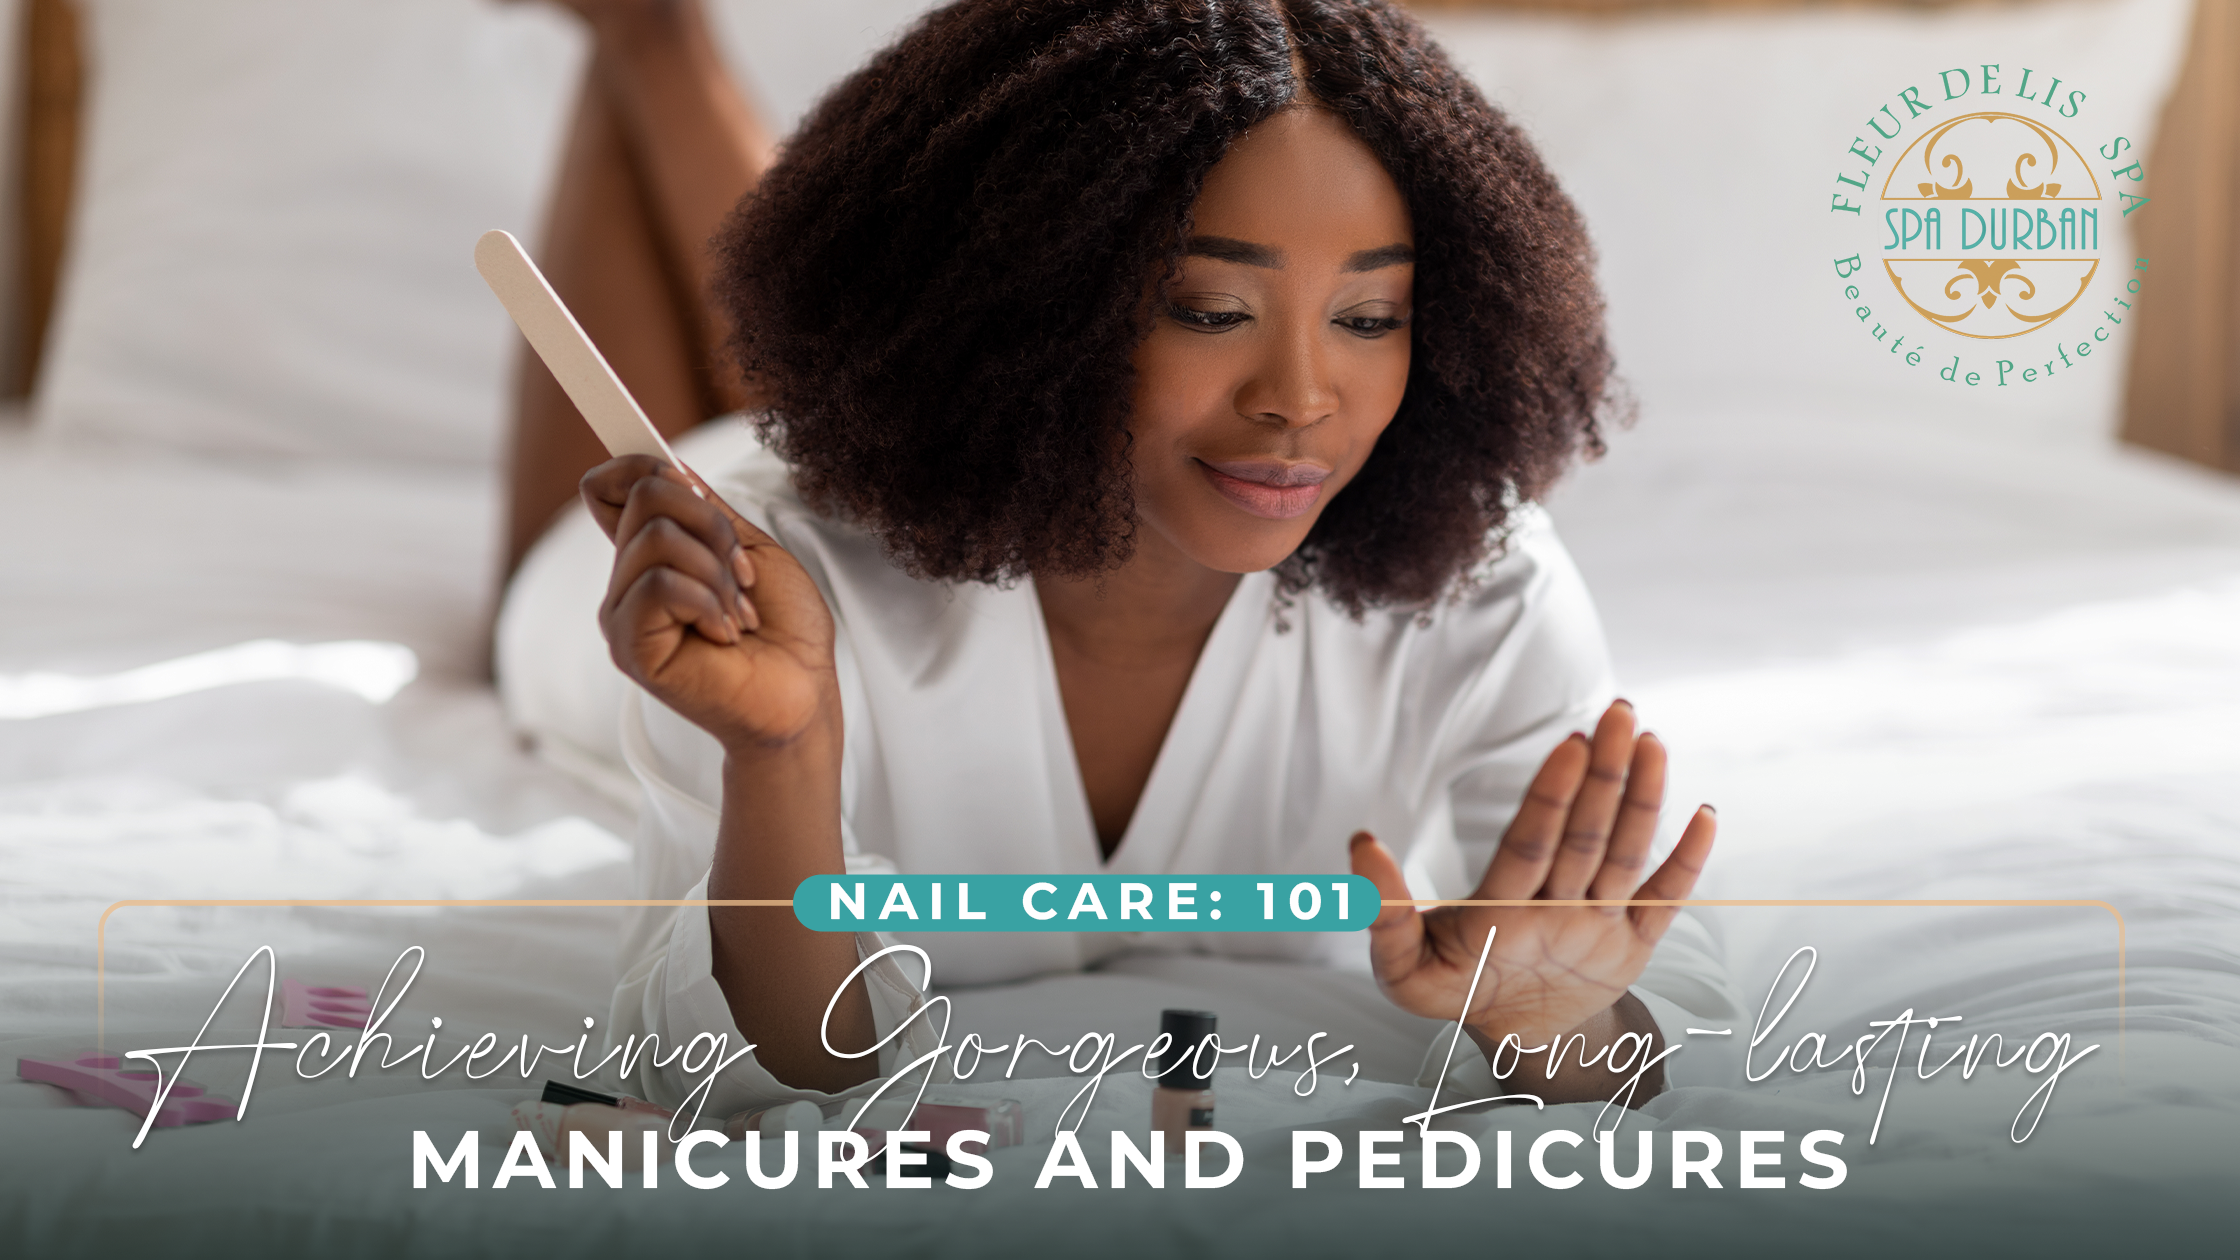 Nail Care 101: Achieving Gorgeous, Long-lasting Manicures and Pedicures